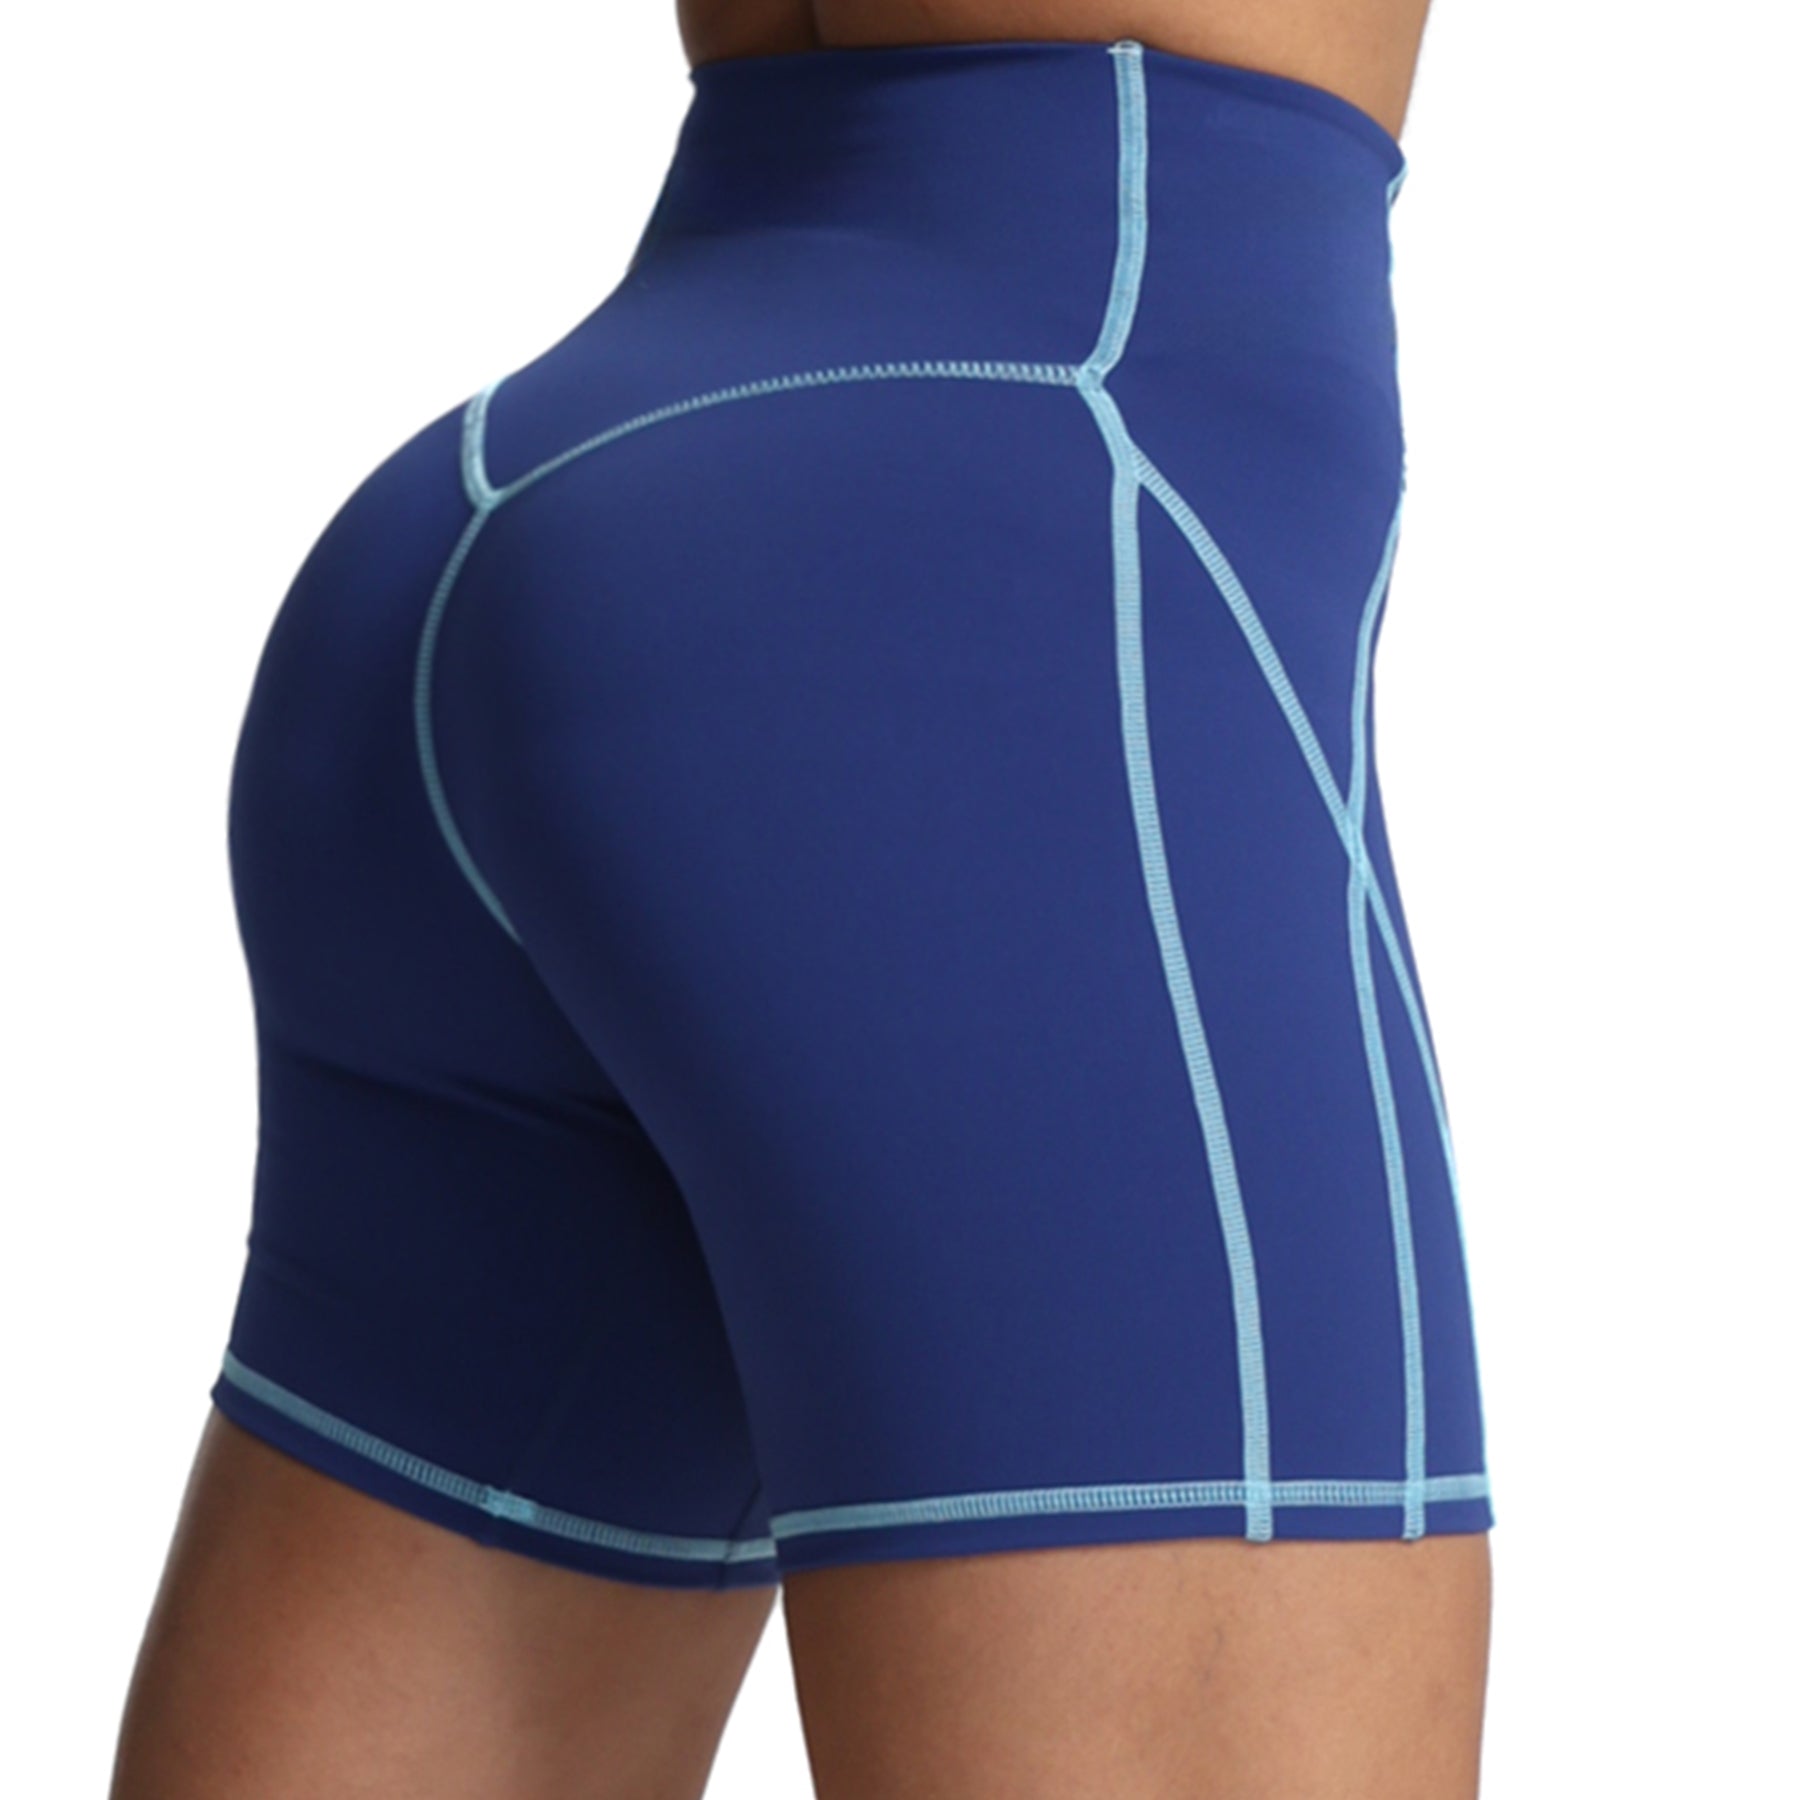 Aoxjox "Lexi Lined" Shorts